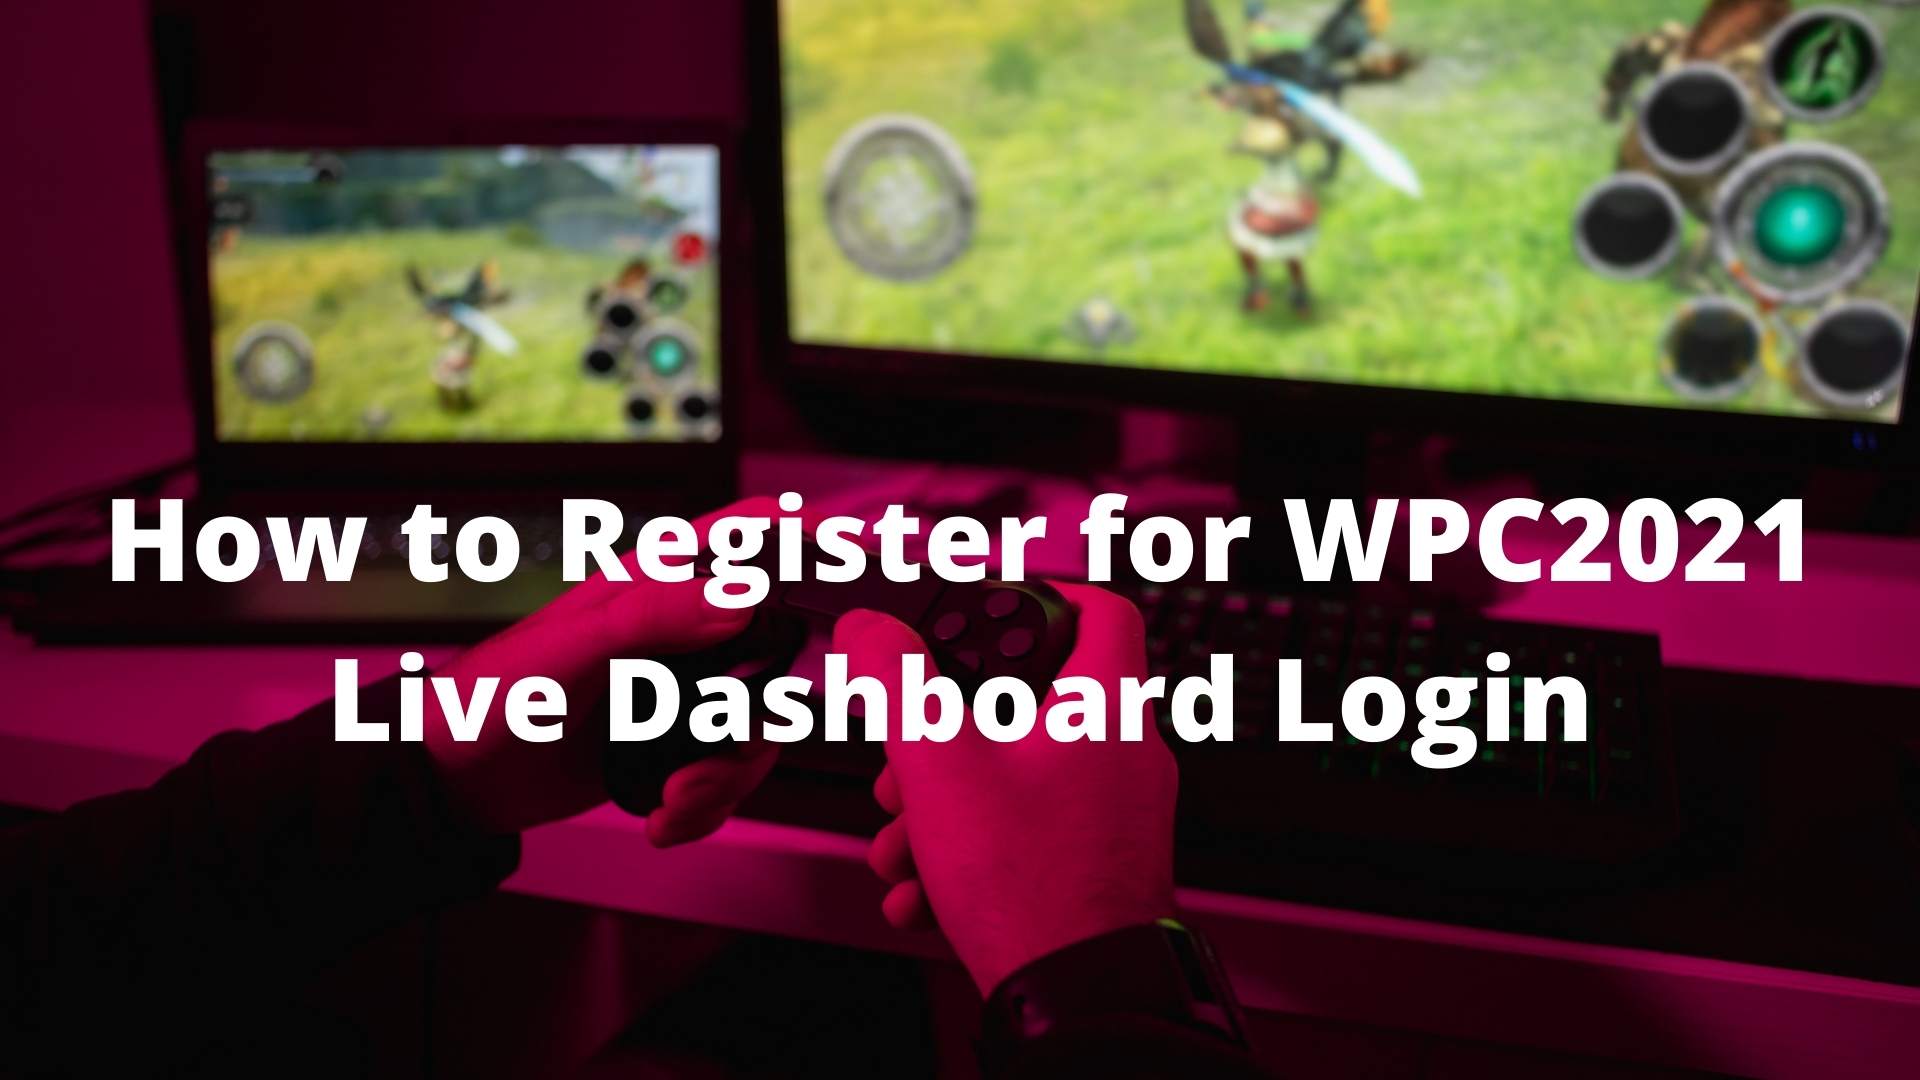 How to Register for WPC2021 Live Login Dashboard